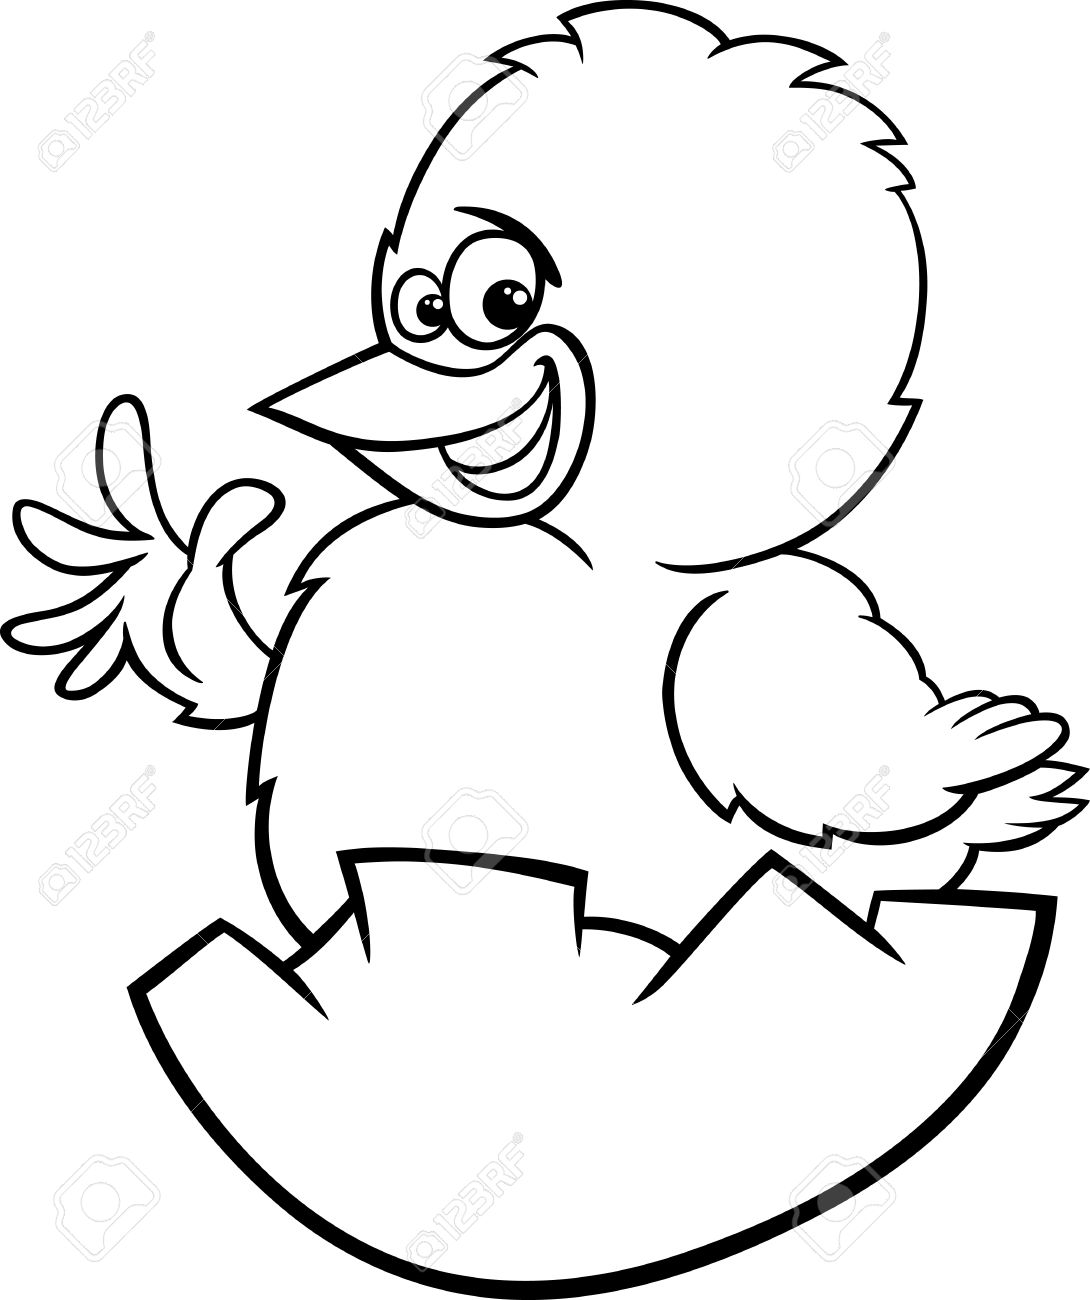 Black and White Cartoon Illustration of Funny Chicken or Chick...